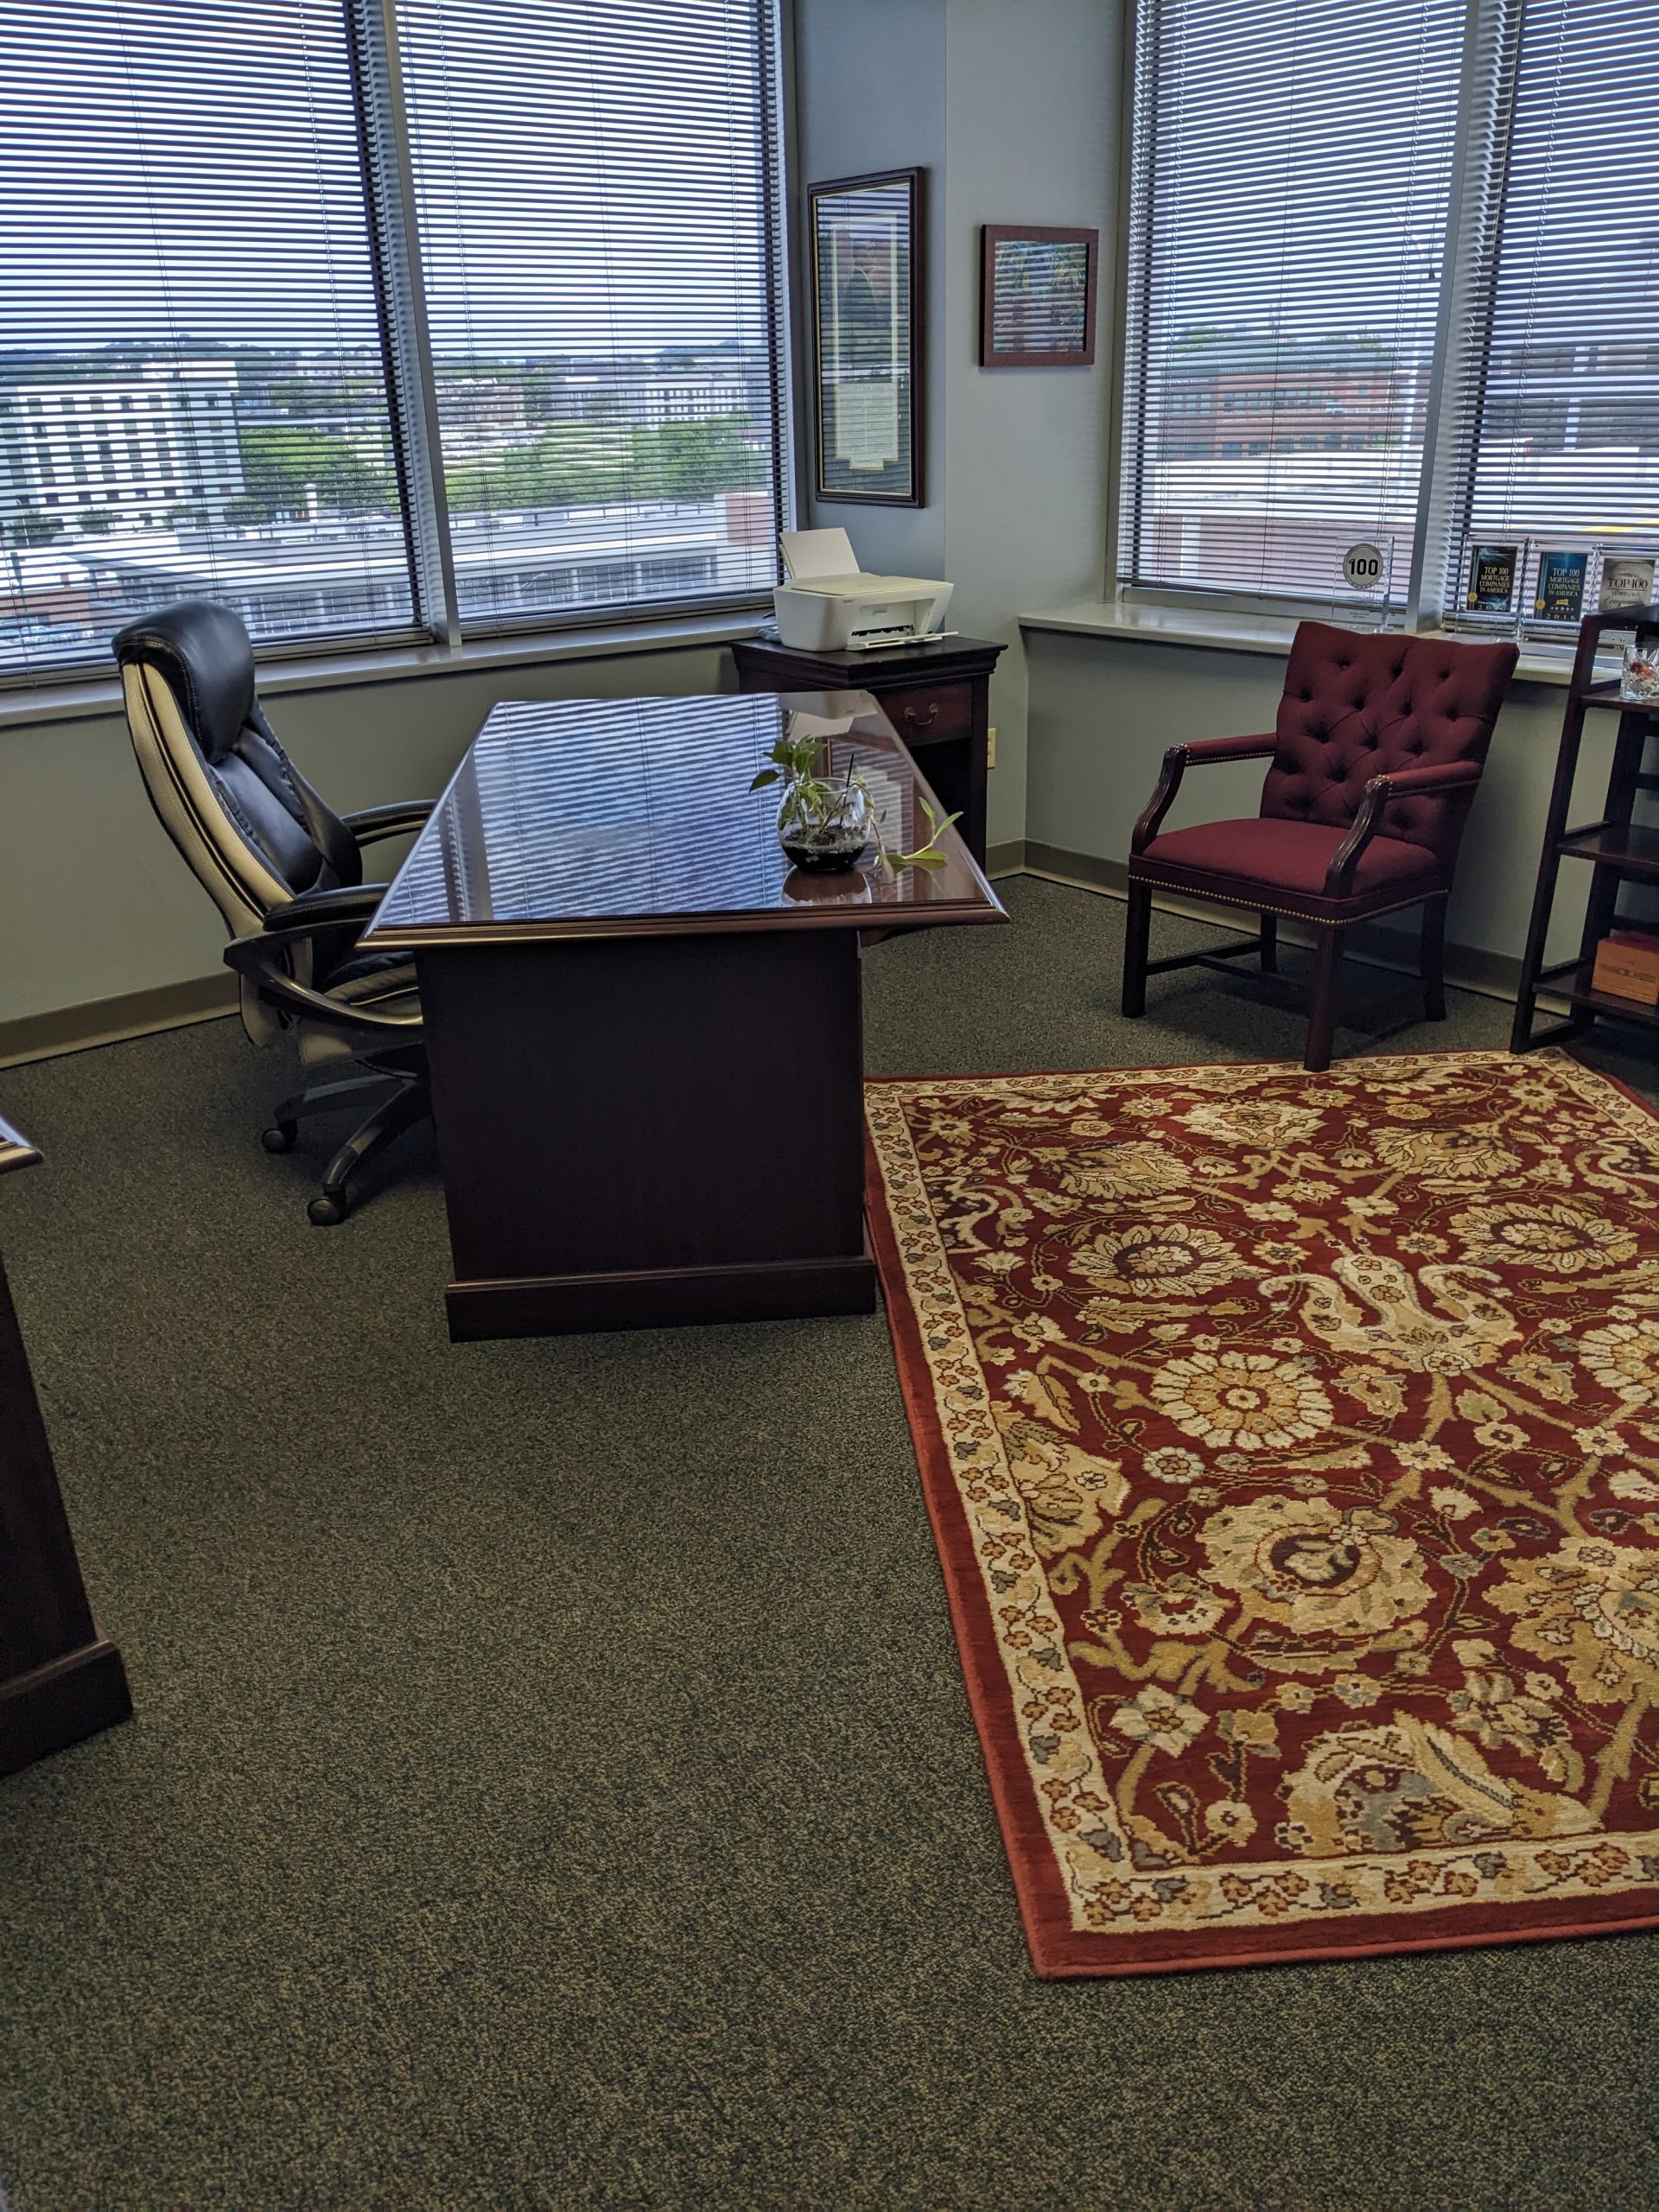 Executive Suite Office Space in Chattanooga, TN